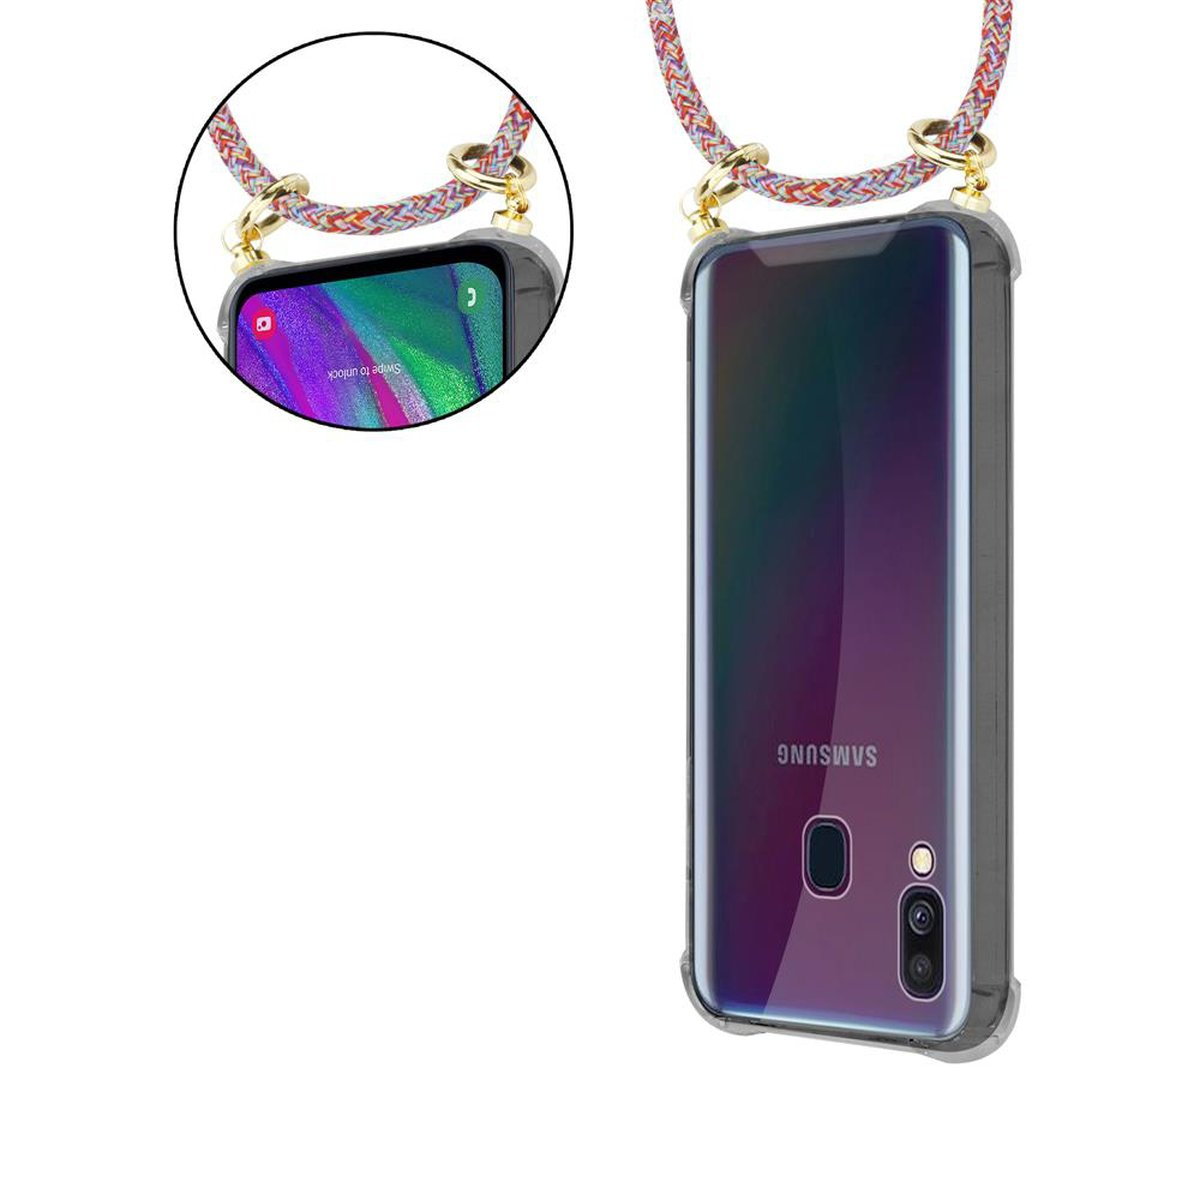 CADORABO Handy Kette mit und Band Kordel Gold Backcover, Samsung, A40, Ringen, Galaxy COLORFUL PARROT abnehmbarer Hülle